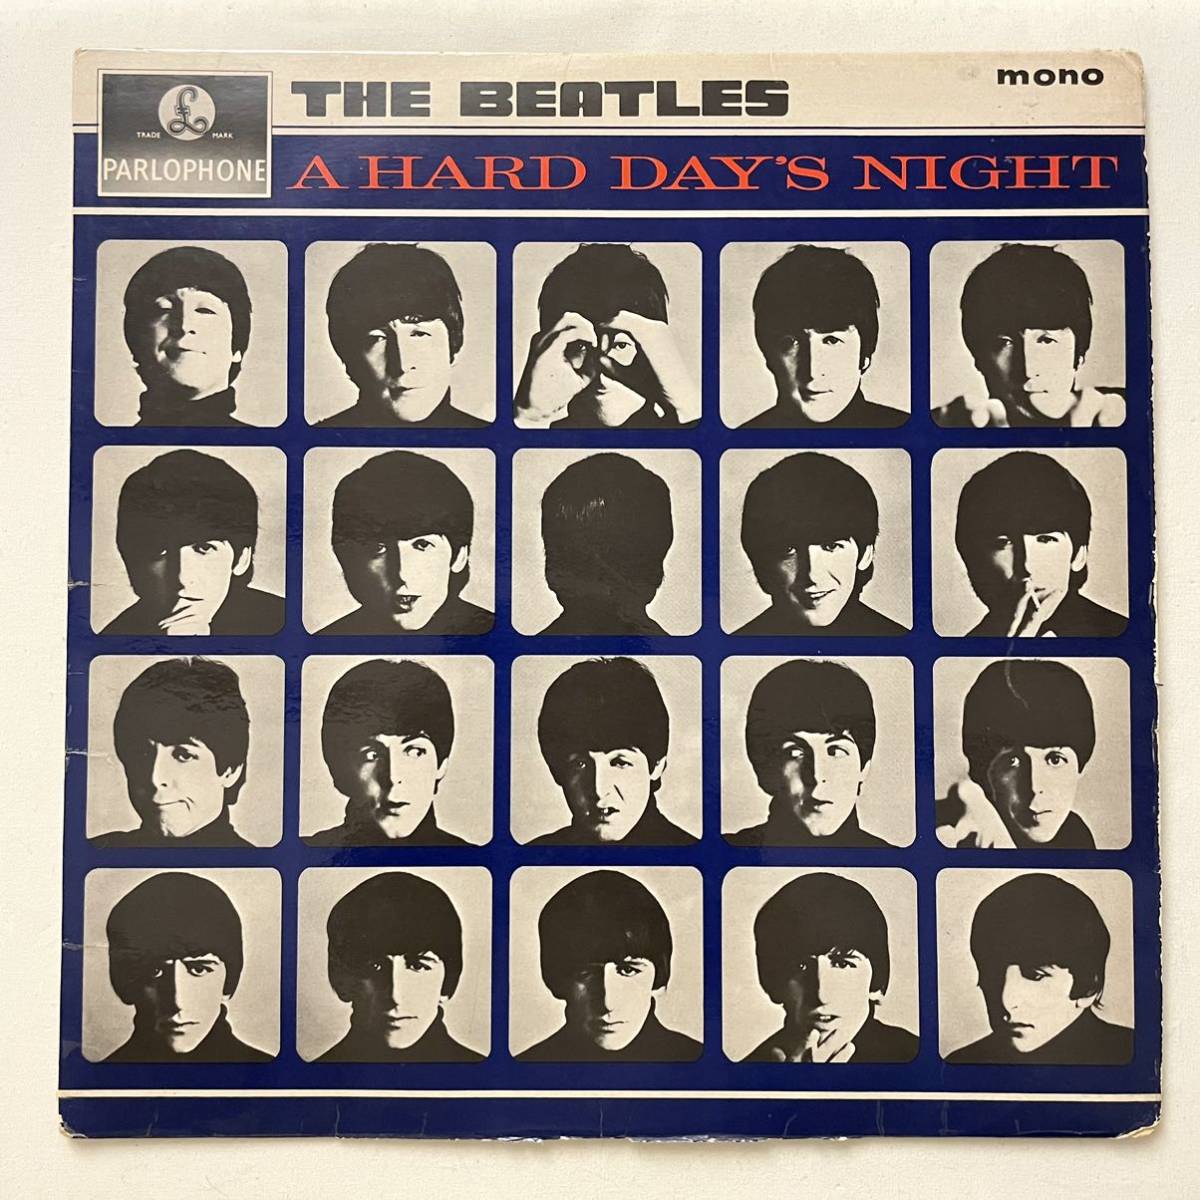 PARLOPHONEリム 初回マト3N/3N THE BEATLES A HARD DAY'S NIGHT UK